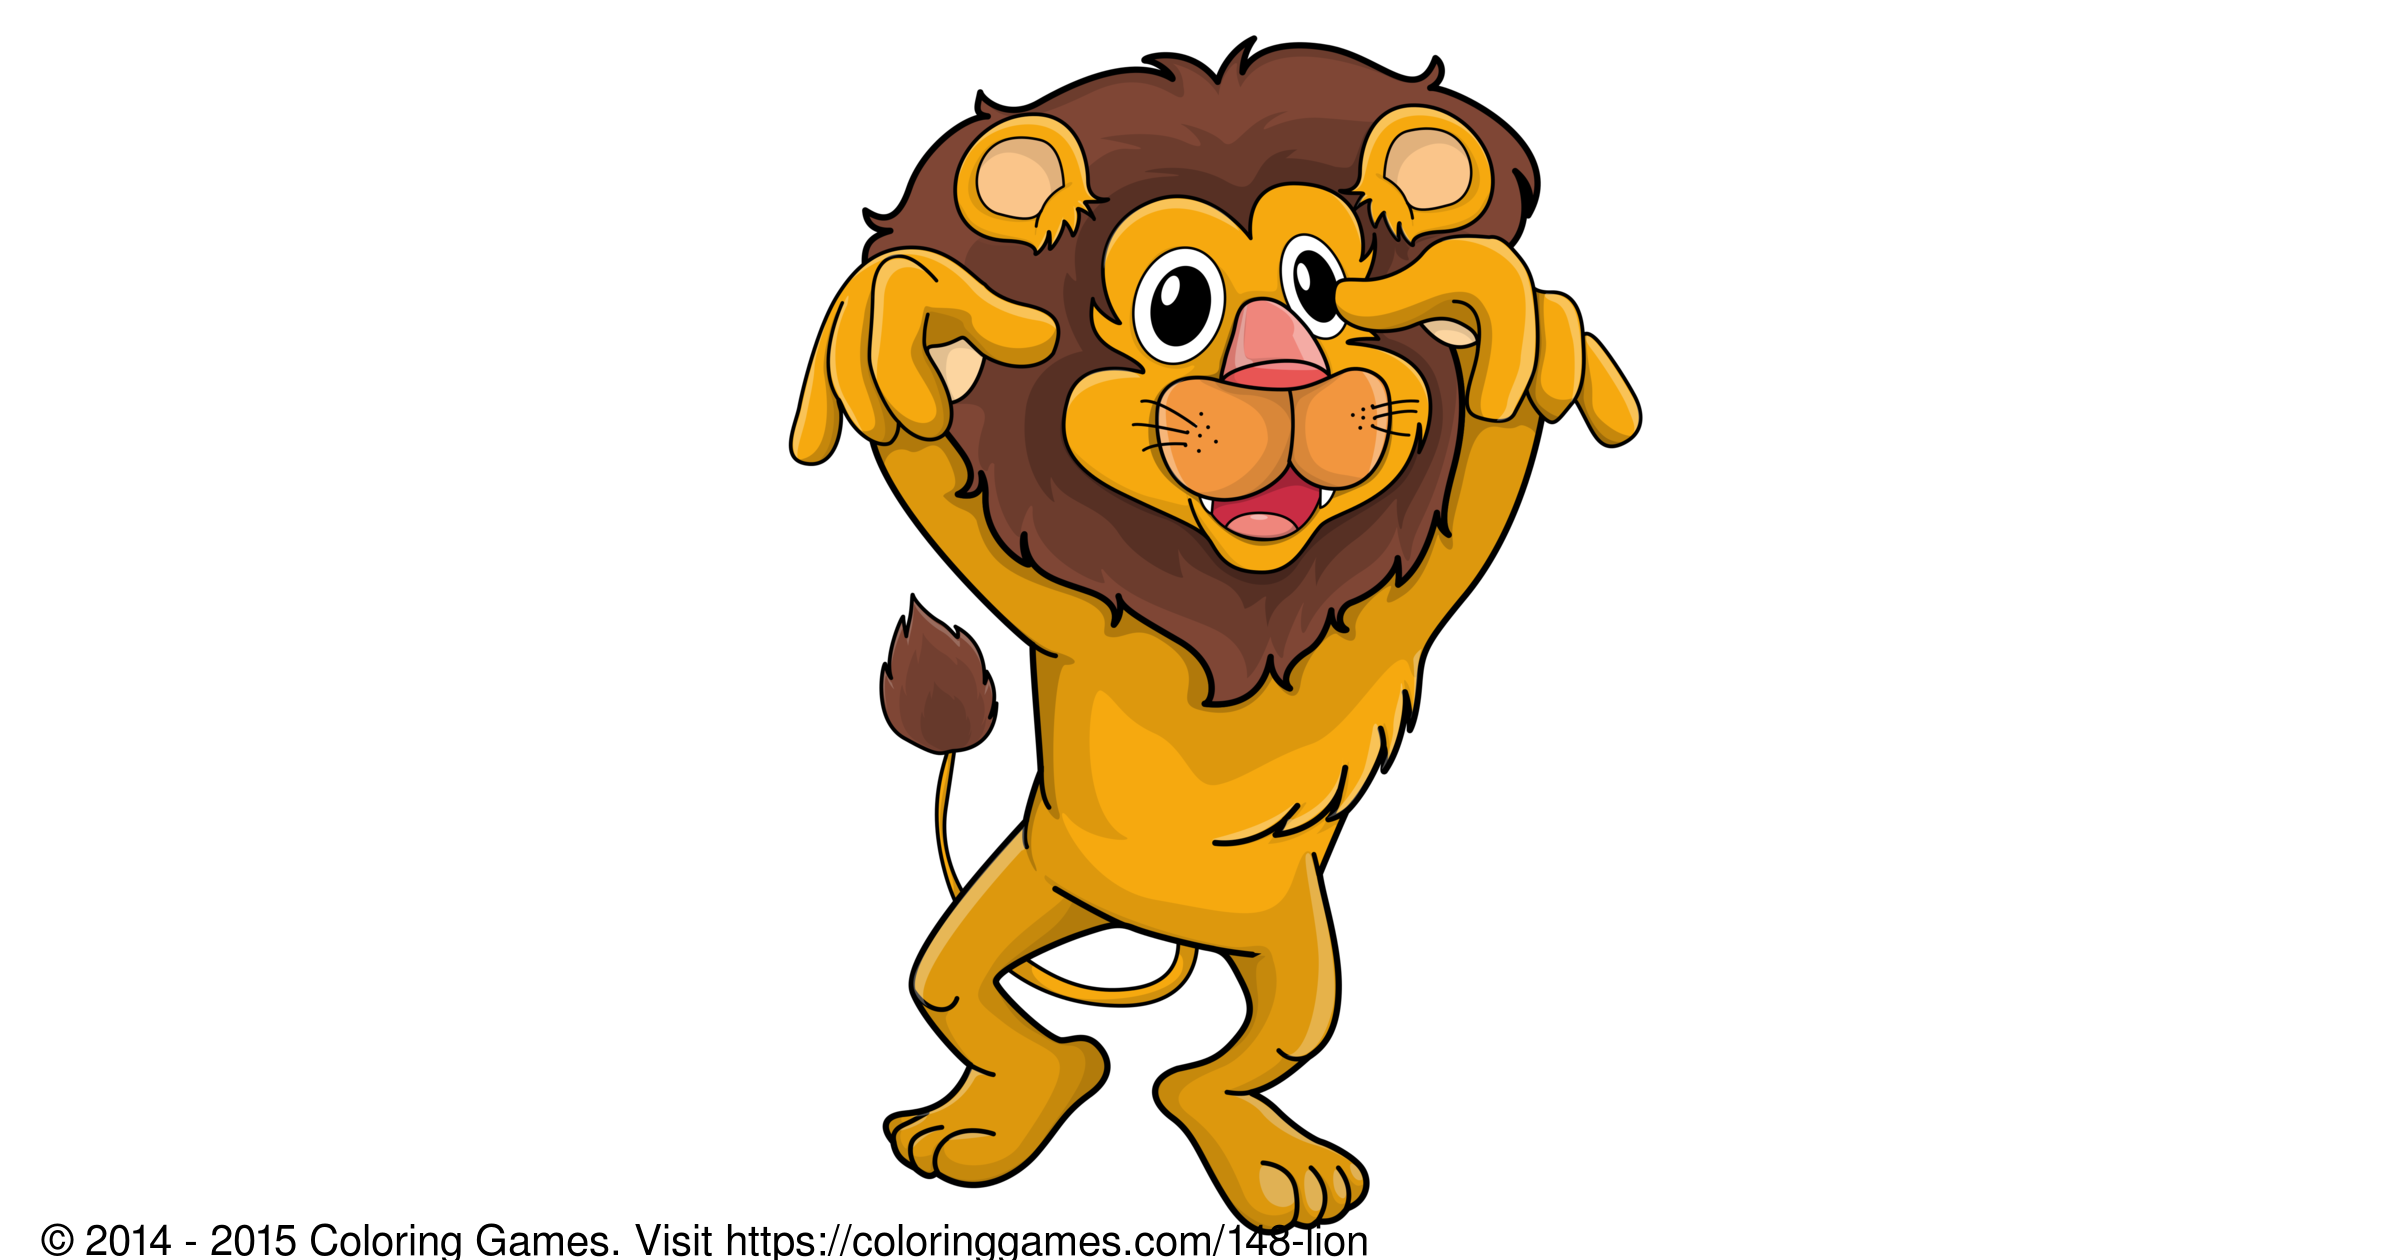 Lion - Coloring Games and Coloring Pages